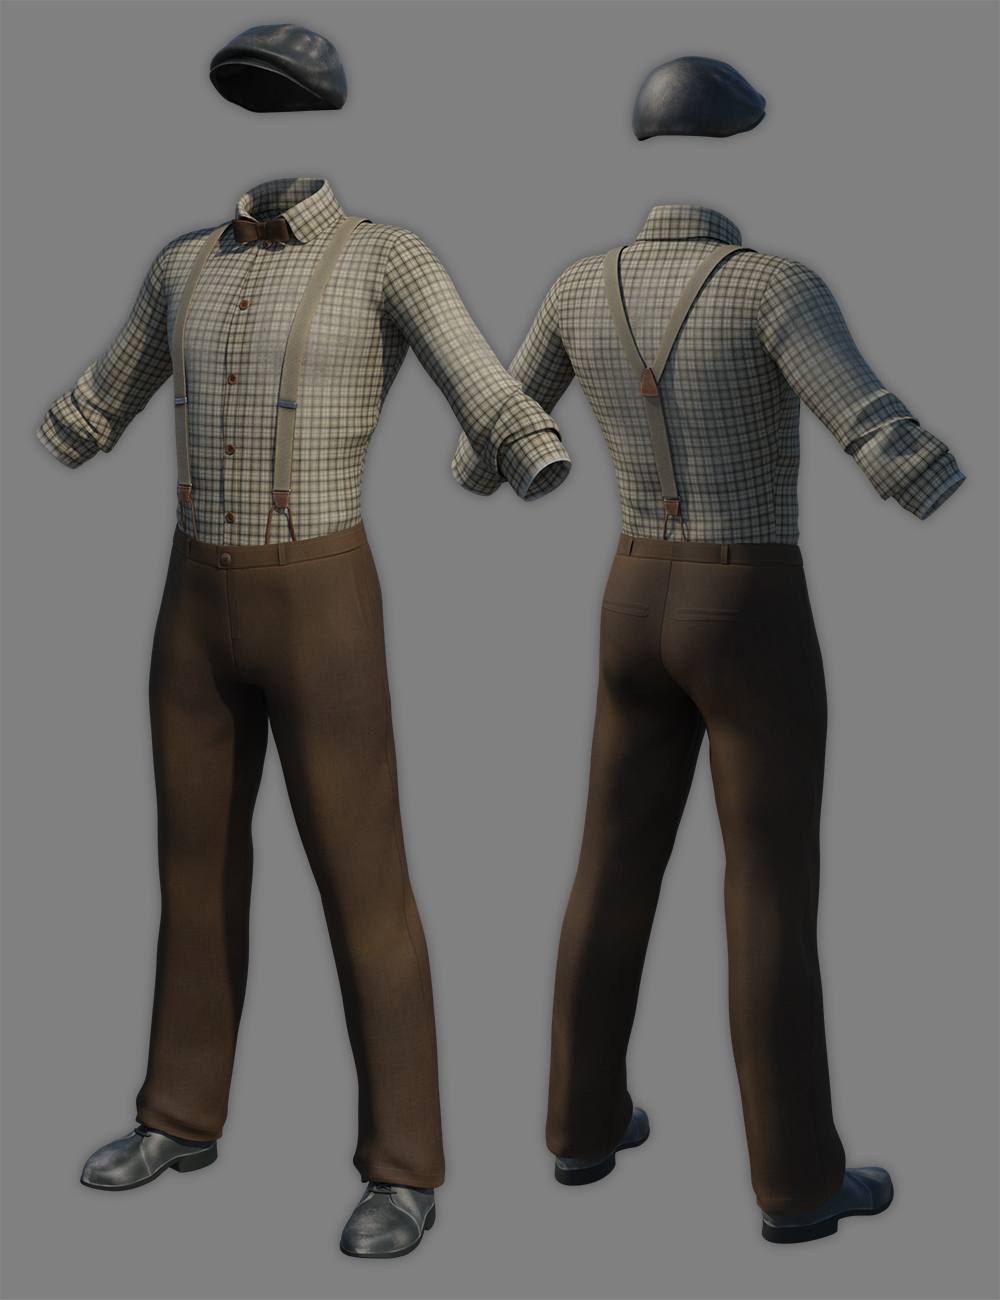 Hard Graft for Casual Craze by: , 3D Models by Daz 3D